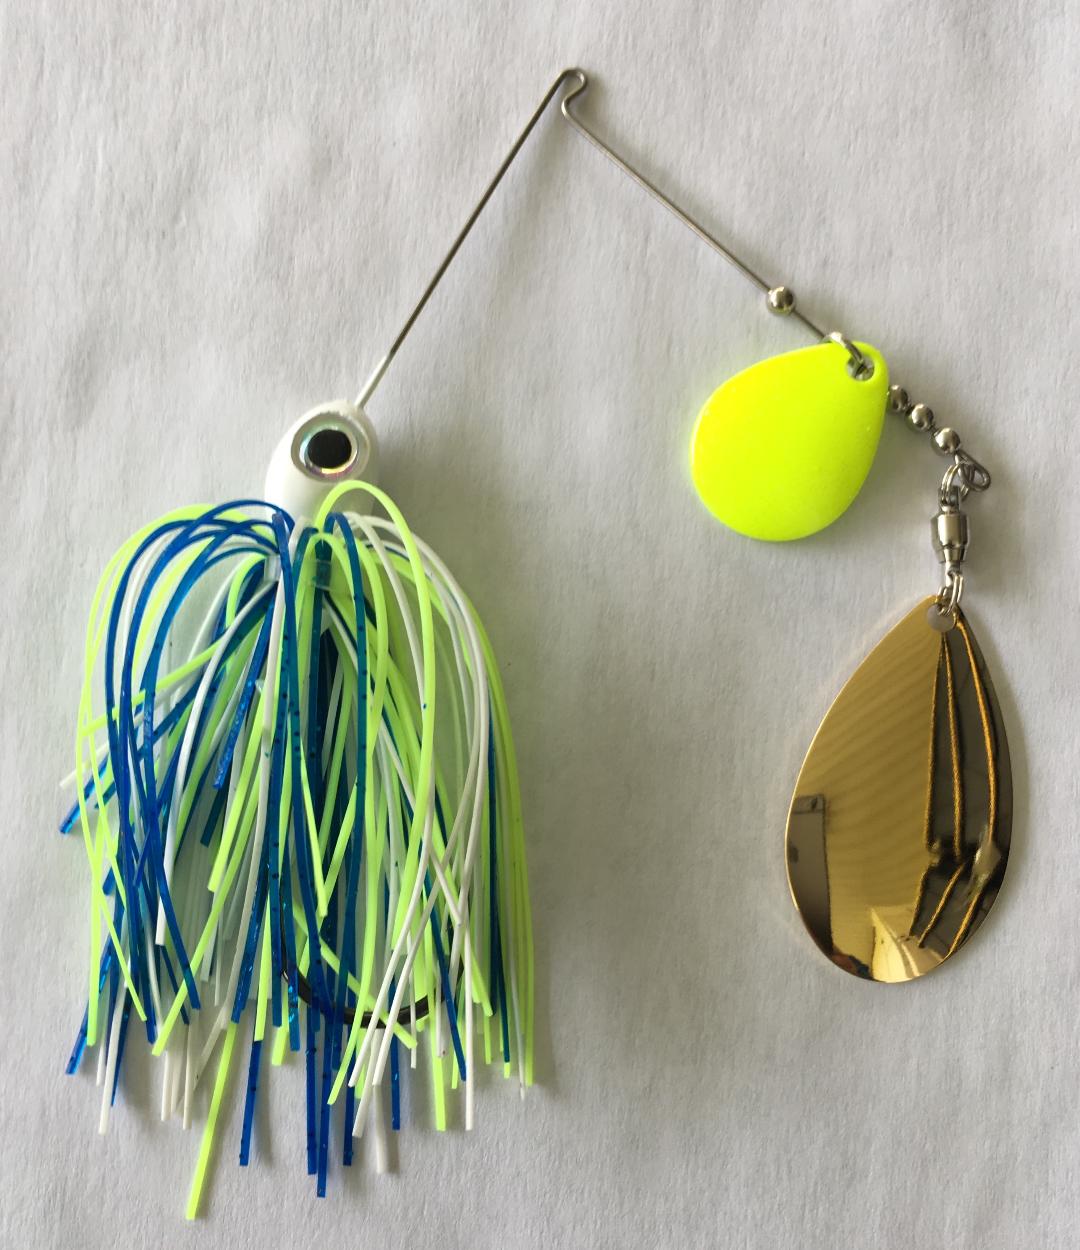 Vicious Spin Doctor - 3/8 oz Spinnerbait - Chartreuse & White